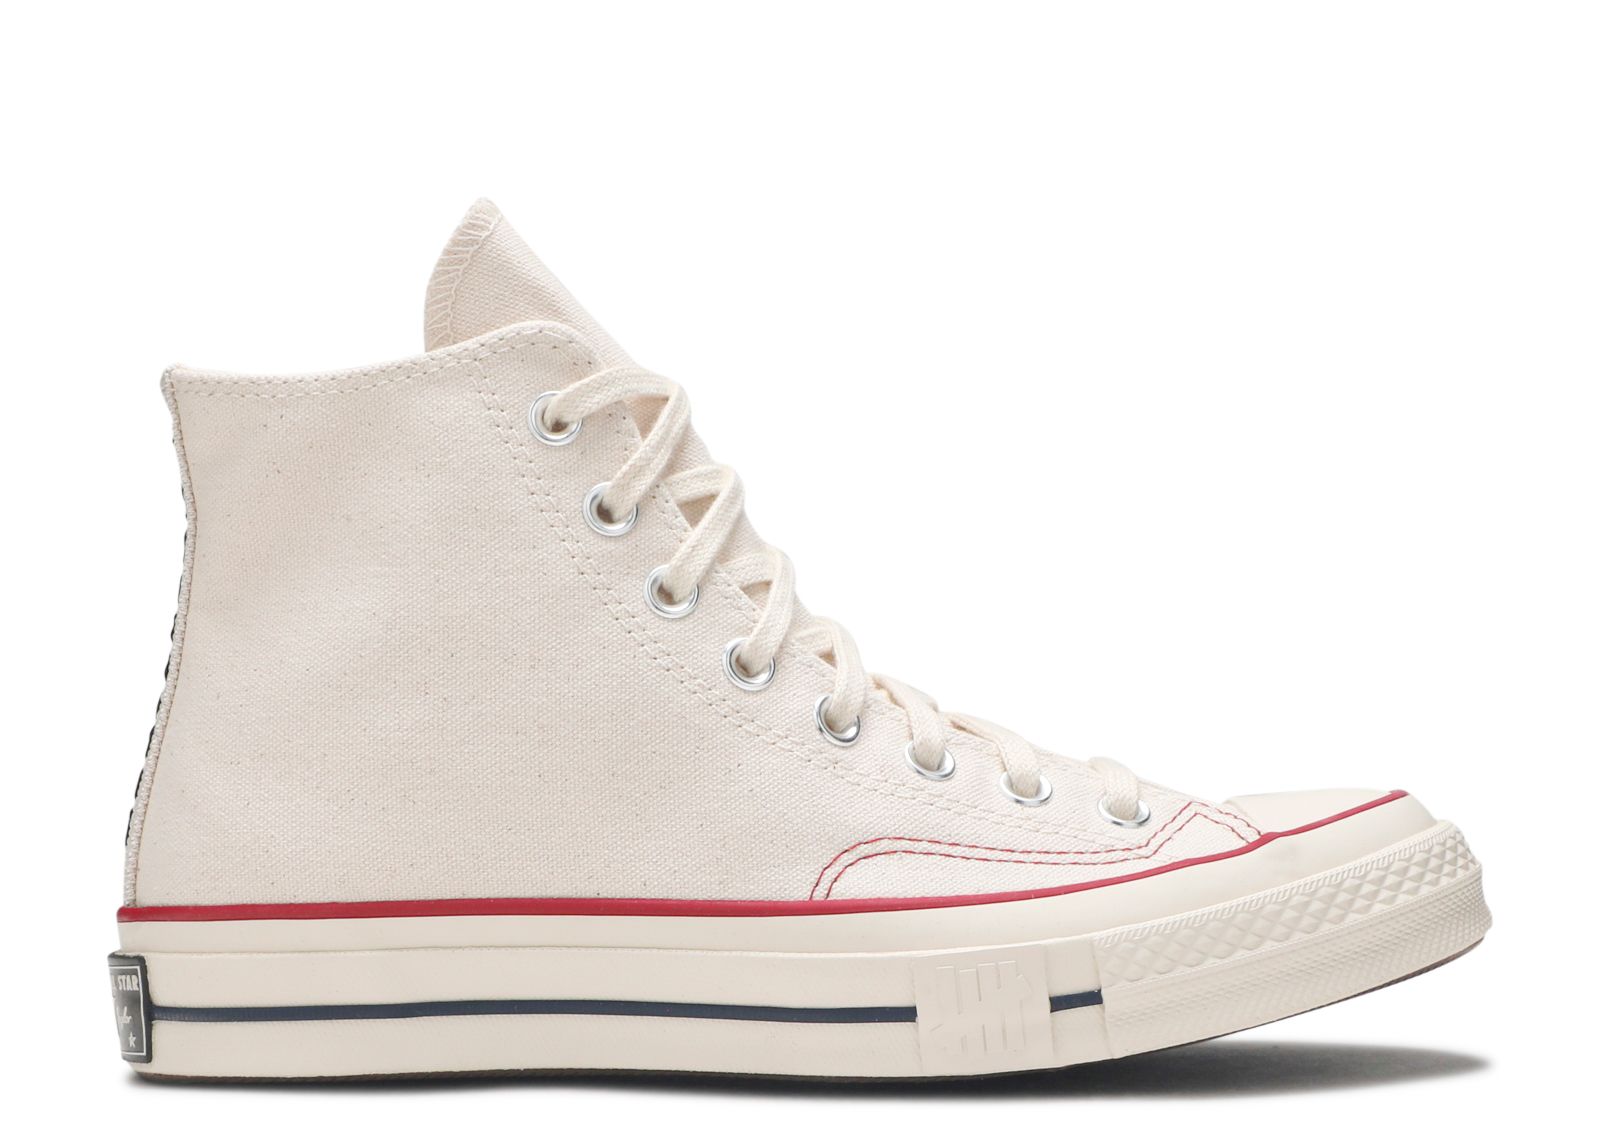 Кроссовки Converse Undefeated X Chuck 70 High 'Parchment', белый